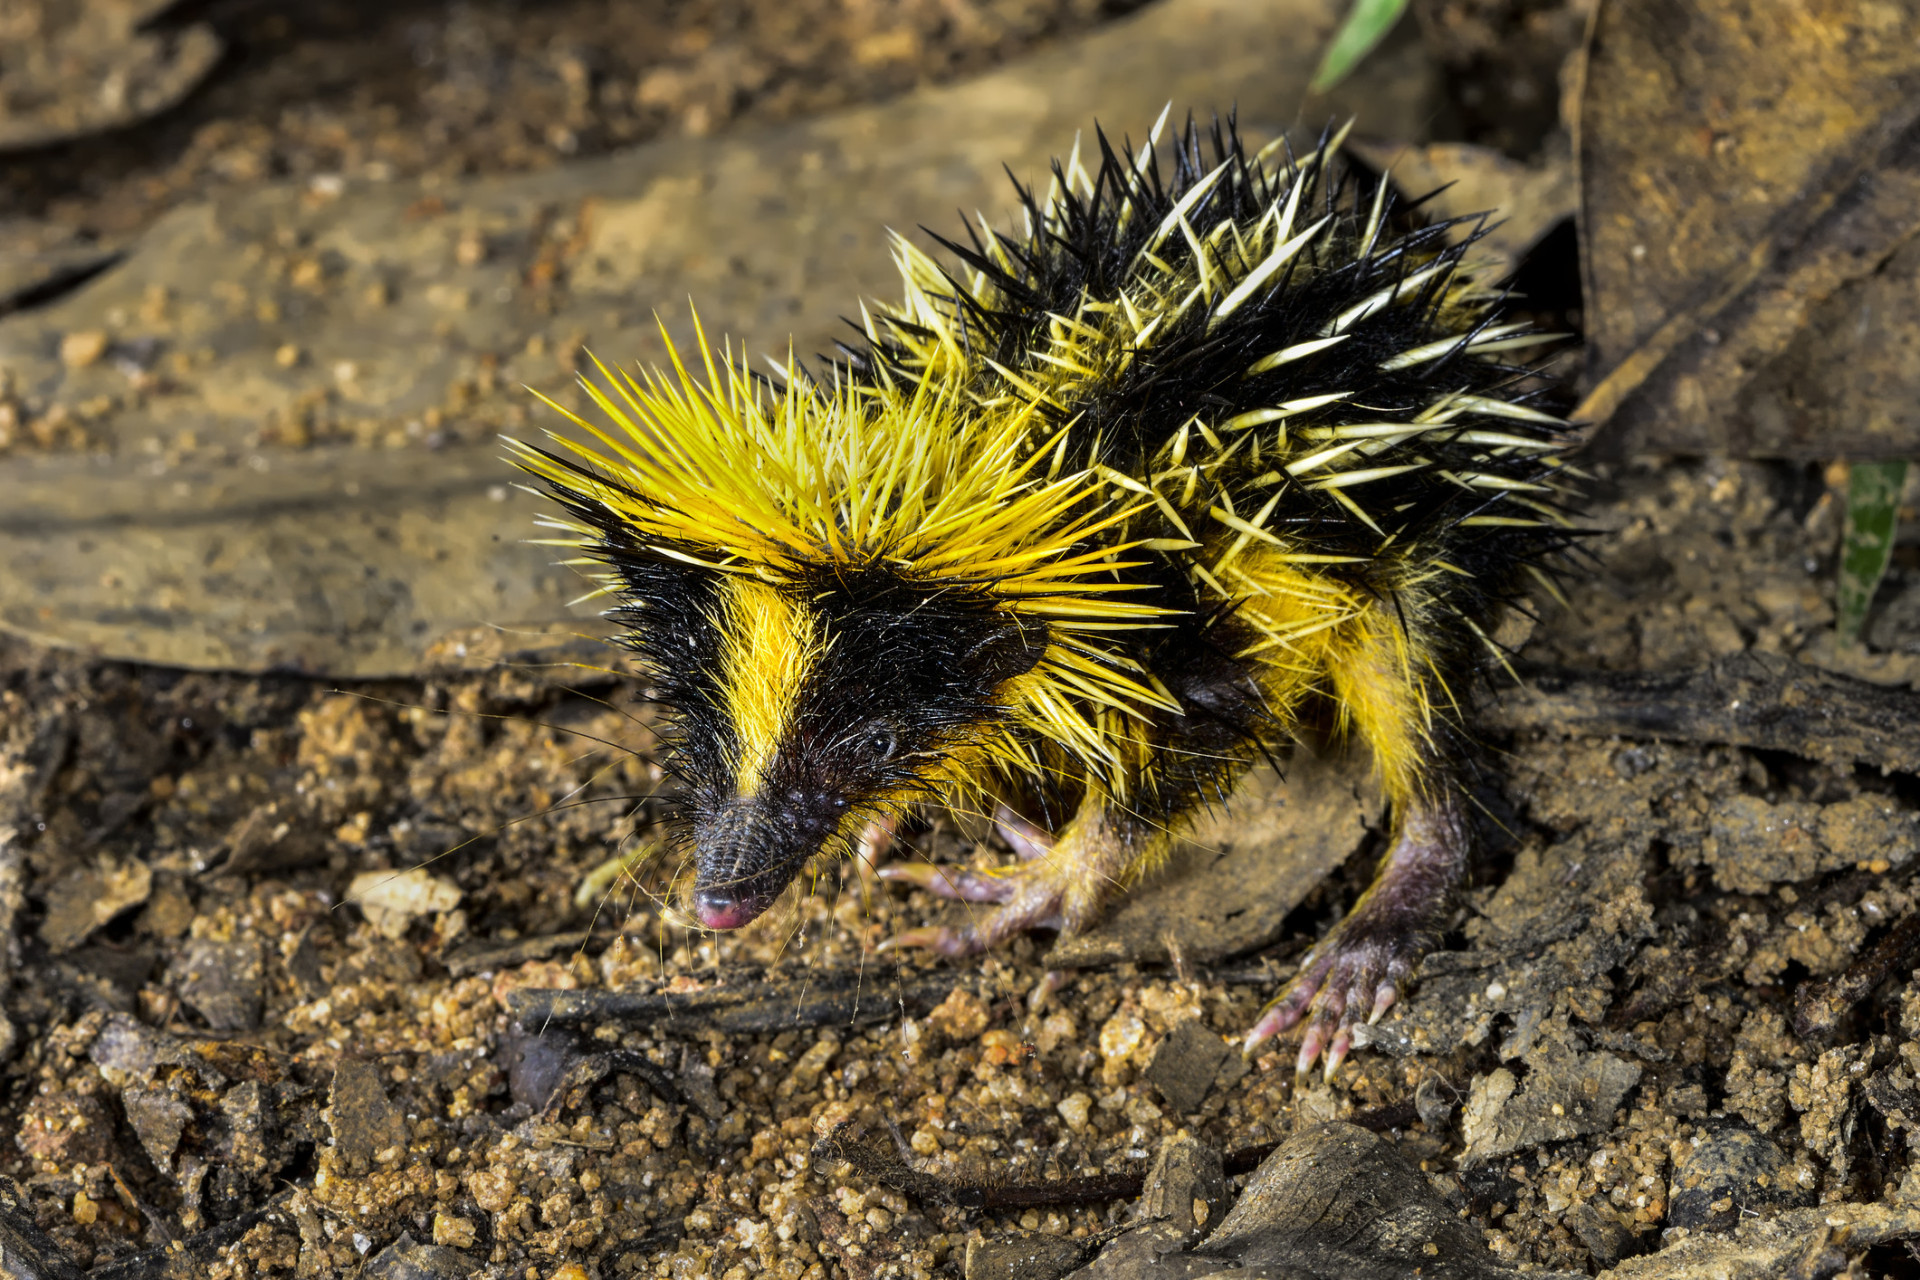 Tenrecs are found on Madagascar and in parts of the African mainland. A diverse species, some resemble hedgehogs, like this spiky, punky, peroxide-colored resident.<p><a href="https://www.msn.com/en-us/community/channel/vid-7xx8mnucu55yw63we9va2gwr7uihbxwc68fxqp25x6tg4ftibpra?cvid=94631541bc0f4f89bfd59158d696ad7e">Follow us and access great exclusive content every day</a></p>